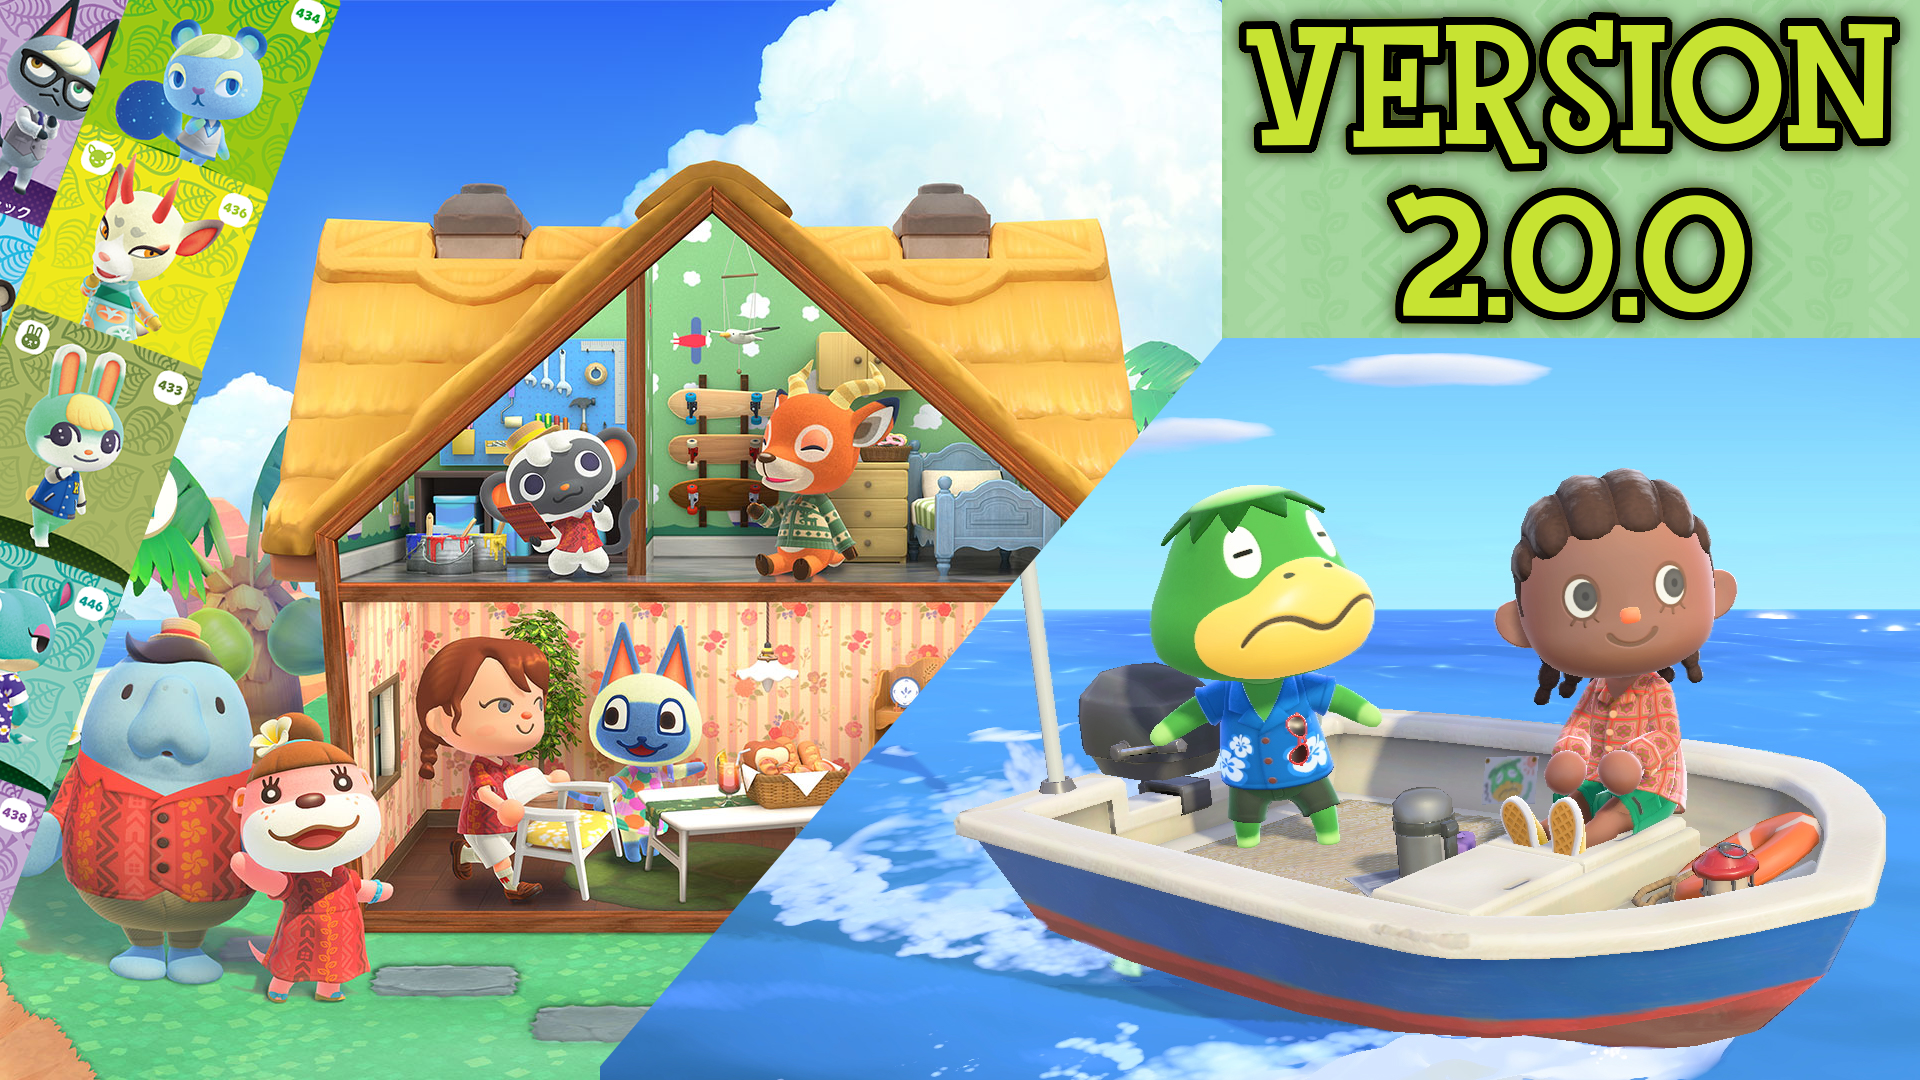 Animal Crossing: New Horizons - Version 2.0.0 Announced, Releasing November  5th